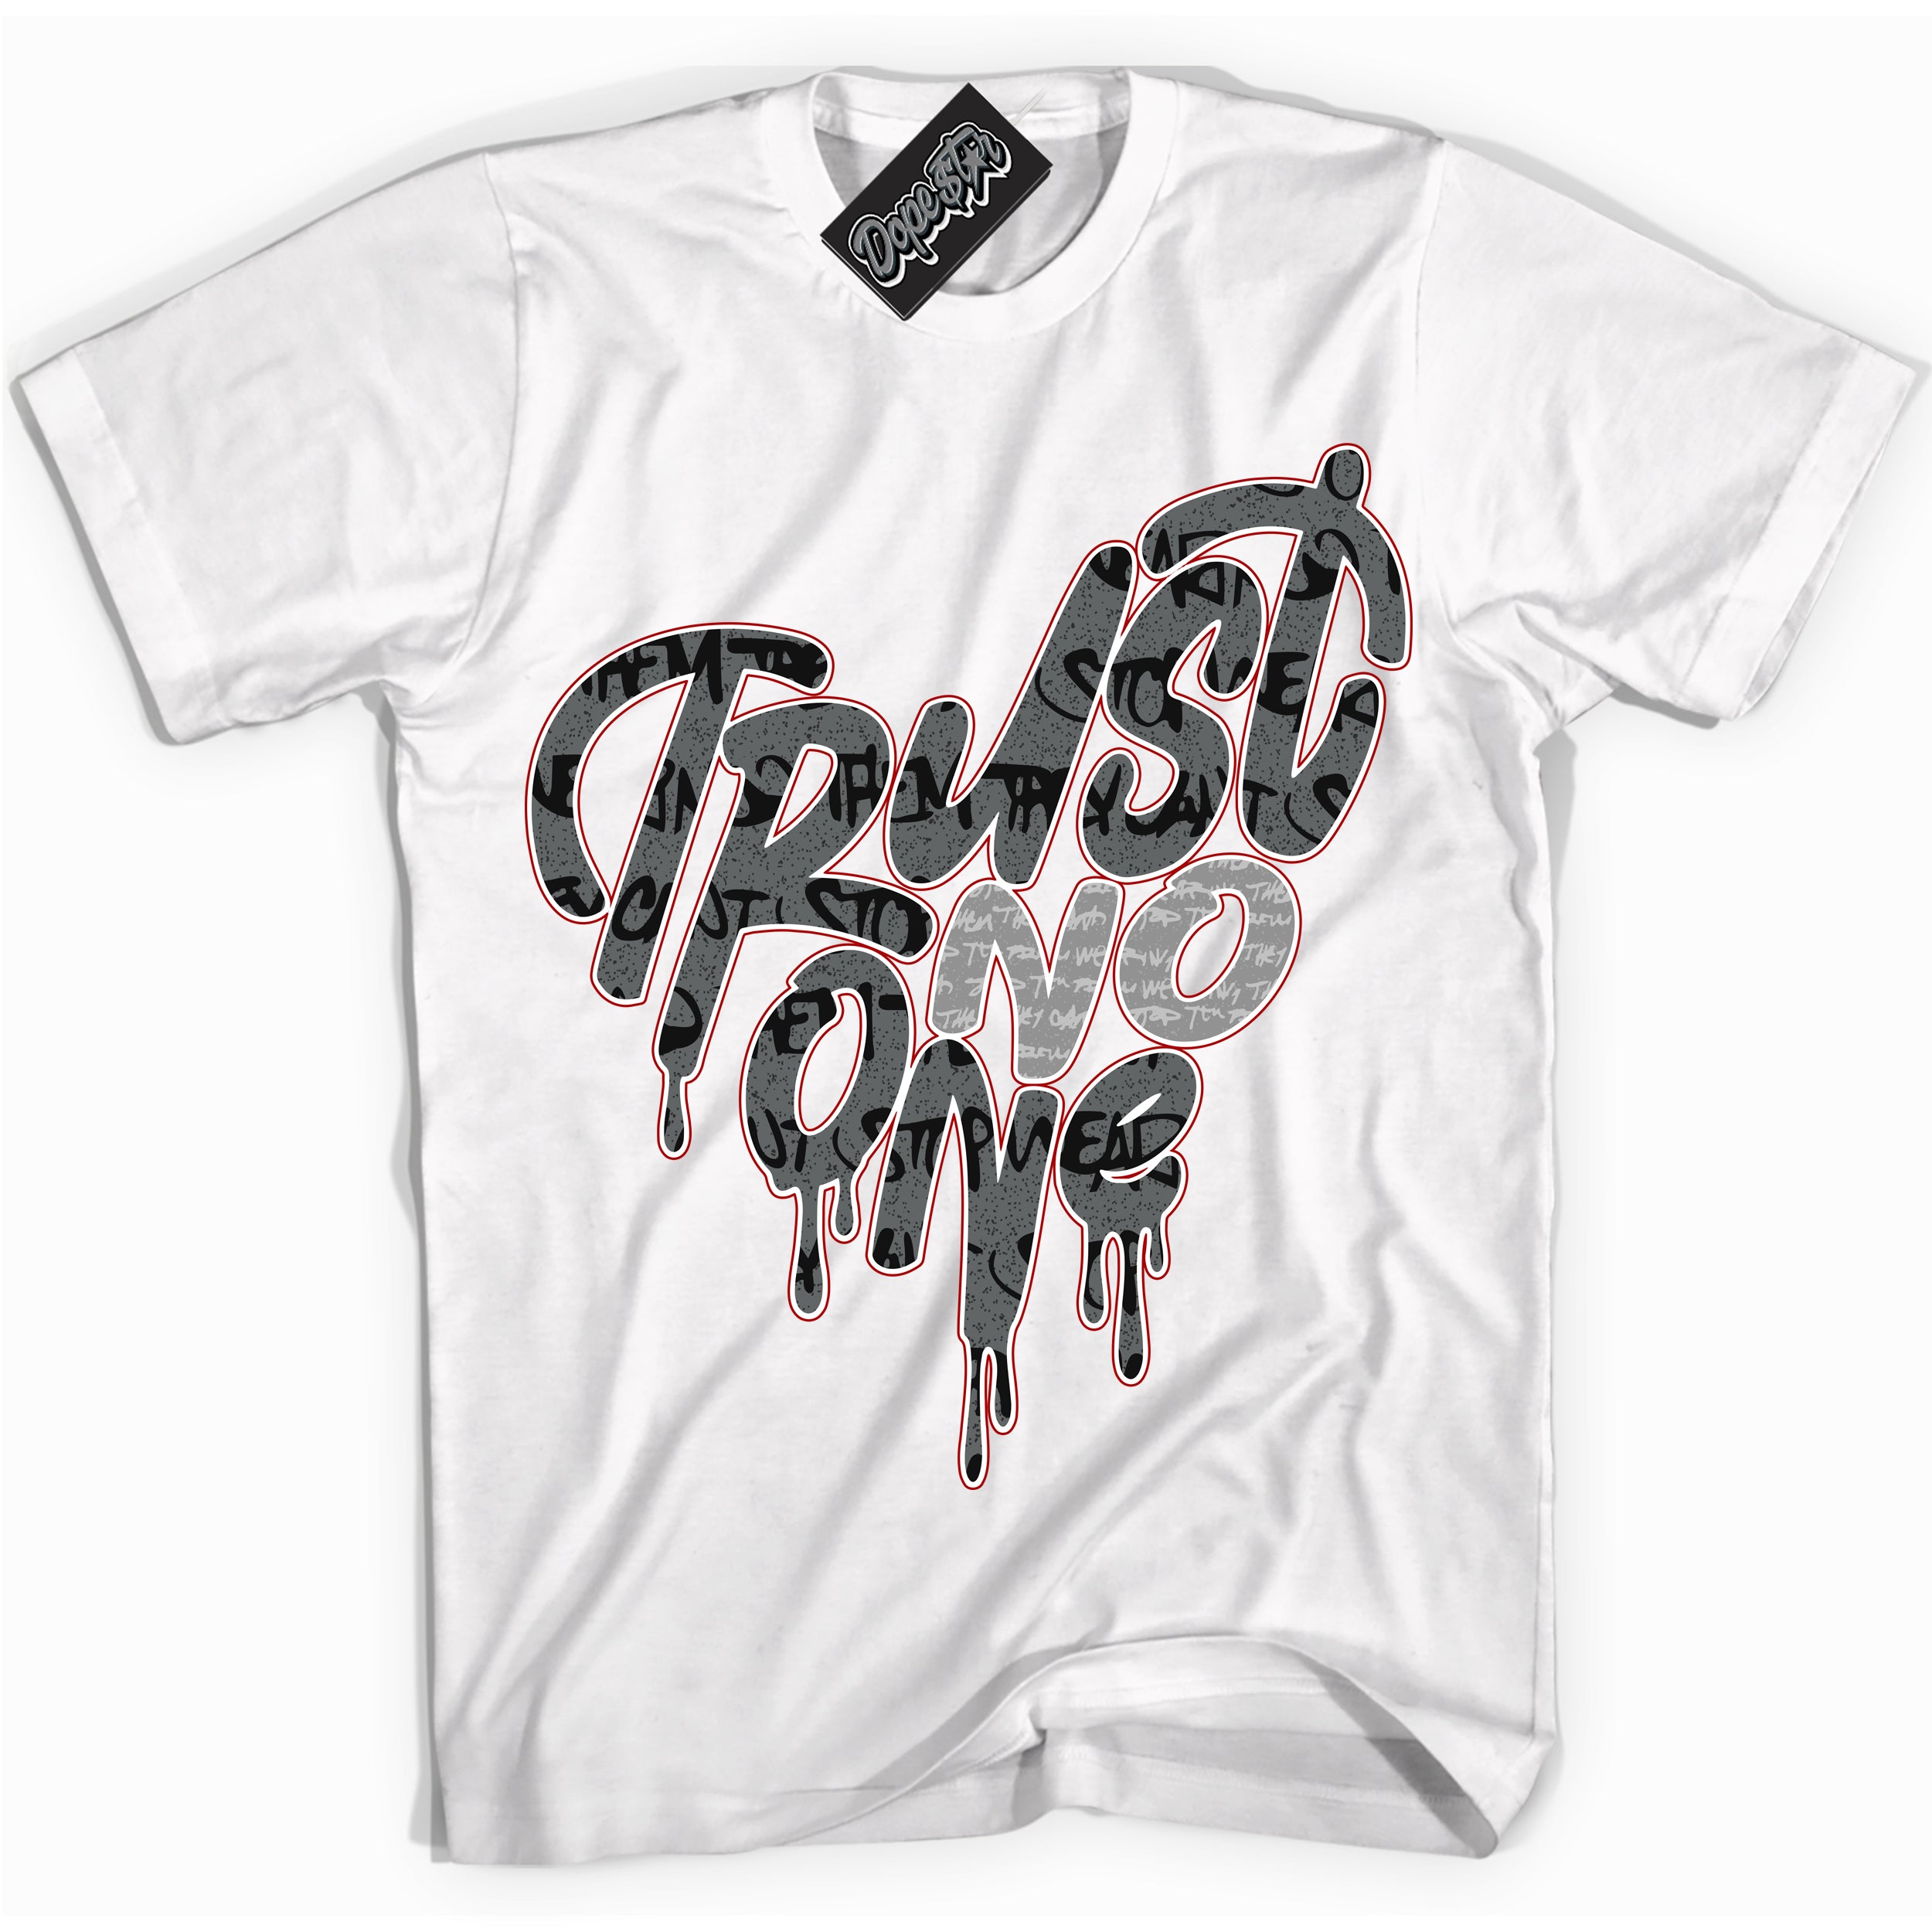 Cool White Shirt with “ Trust No One Heart ” design that perfectly matches Rebellionaire 1s Sneakers.